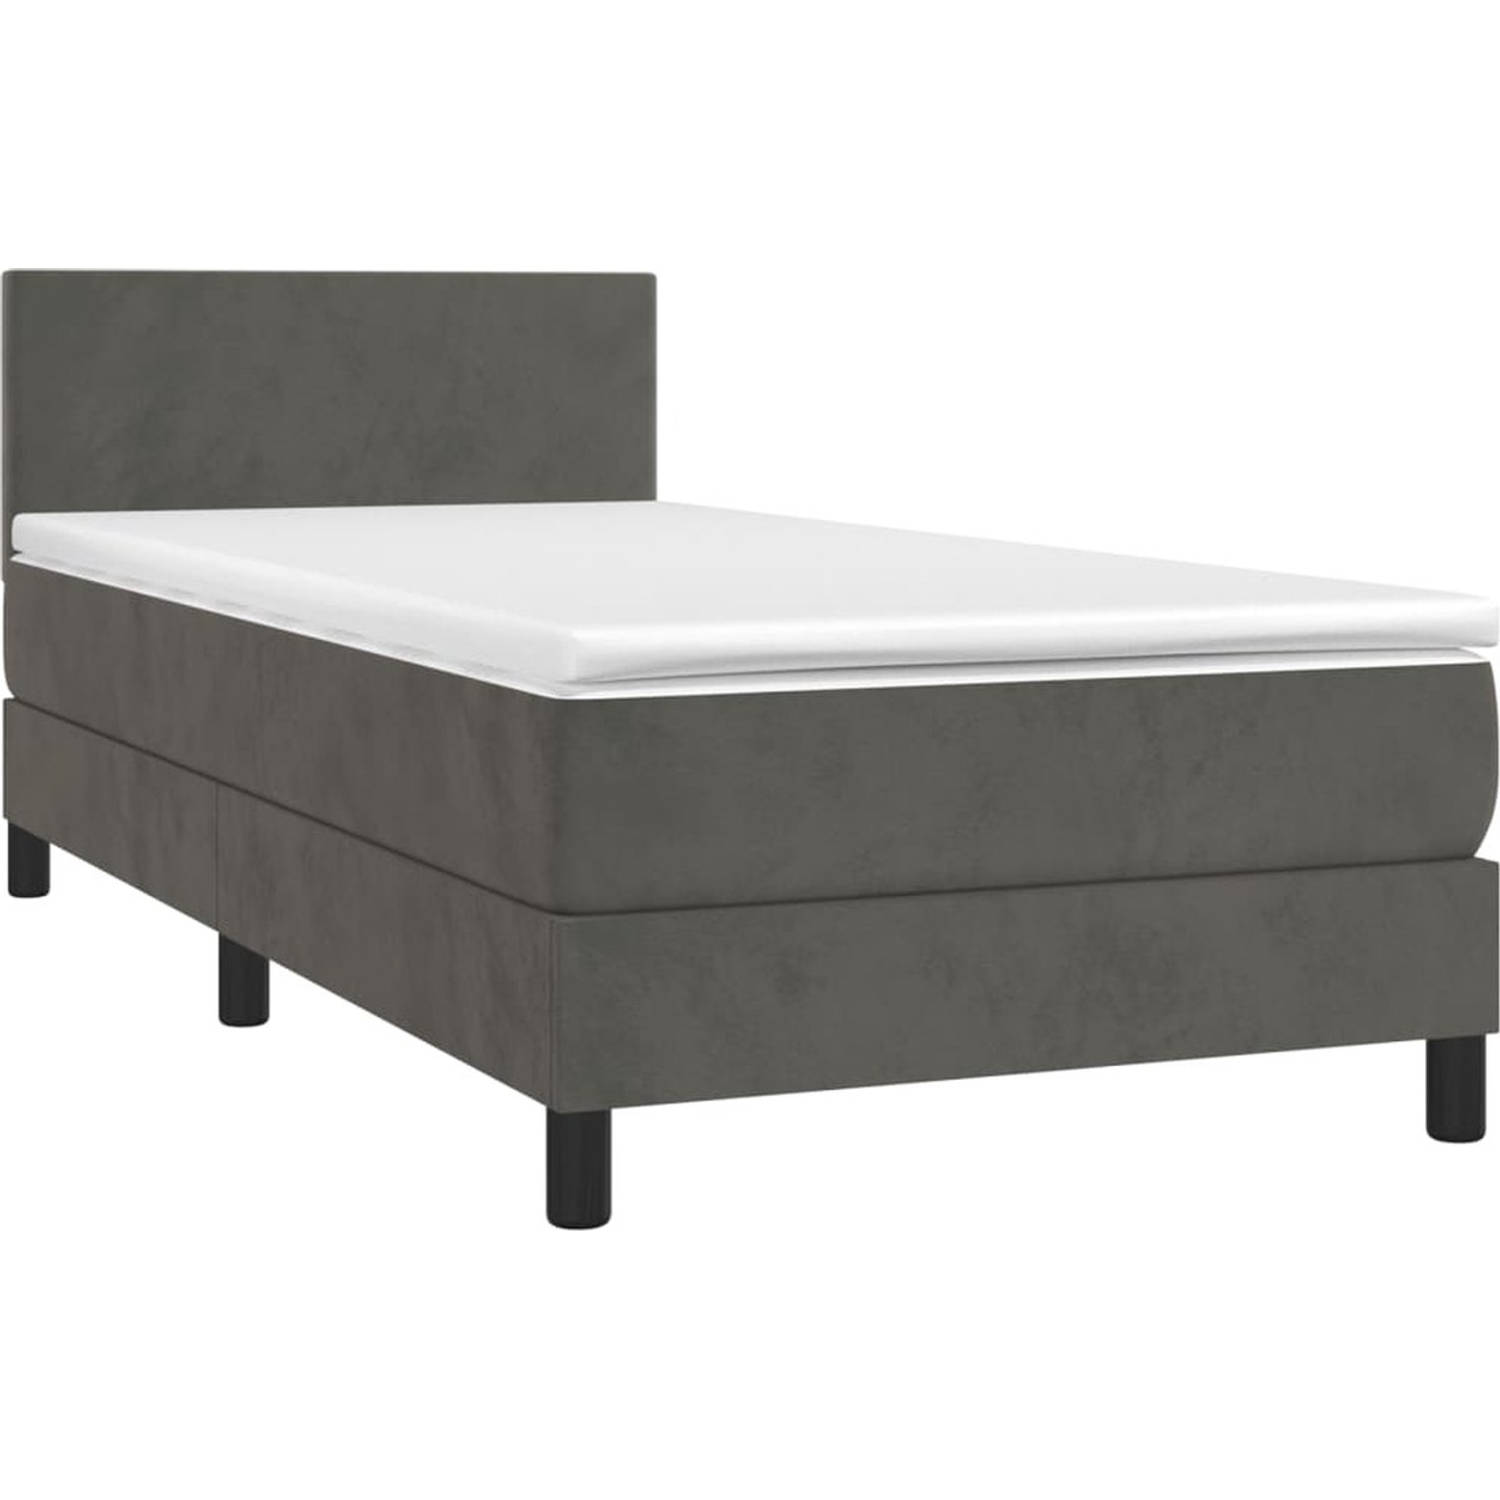 The Living Store Boxspring - fluweel bed met LED-verlichting - 100x200 cm